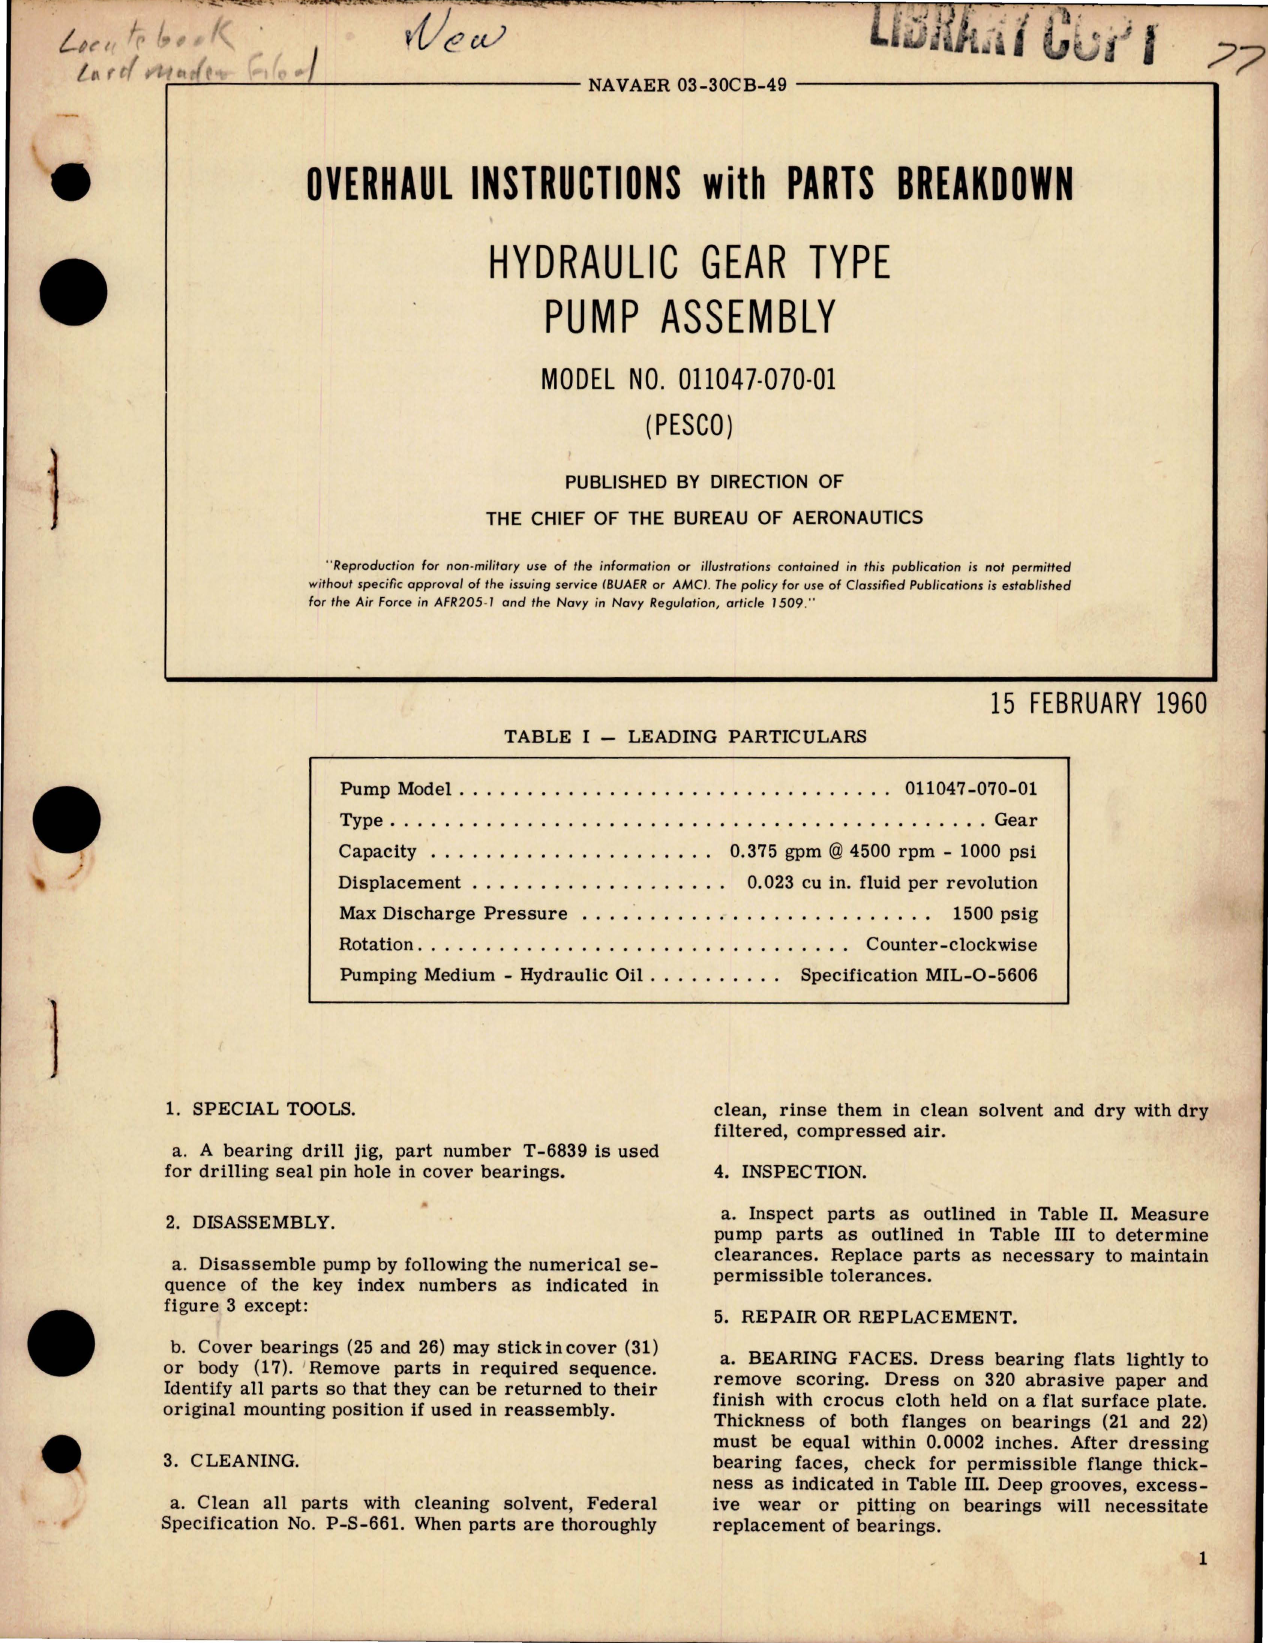 Sample page 1 from AirCorps Library document: Overhaul Instructions with Parts Breakdown for Hydraulic Gear Type Pump Assembly - Model 011047-070-01 